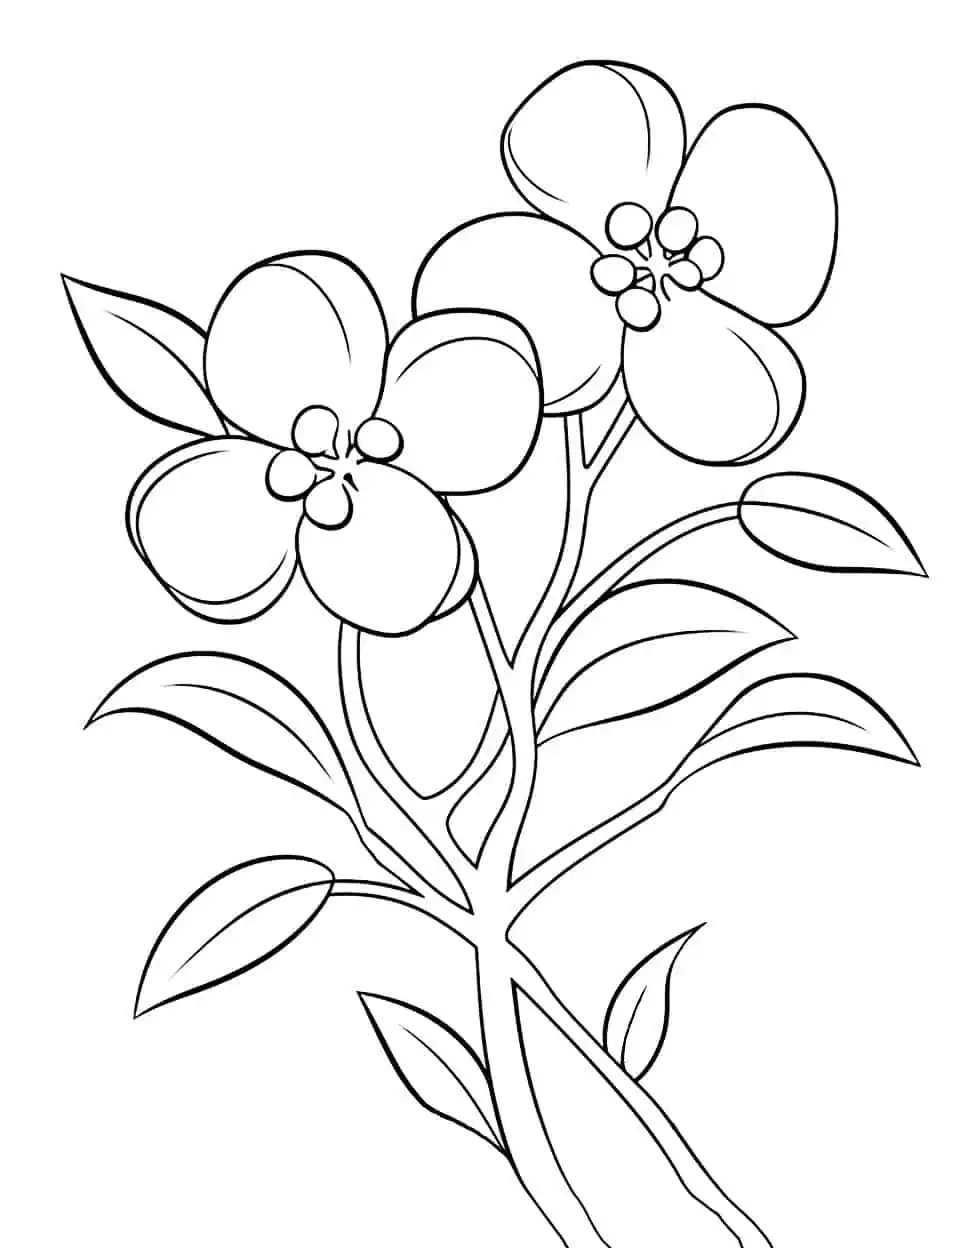 Spring Blossoms for Preschool Coloring Page - An easy-to-color page featuring blooming spring flowers perfect for preschool kids.